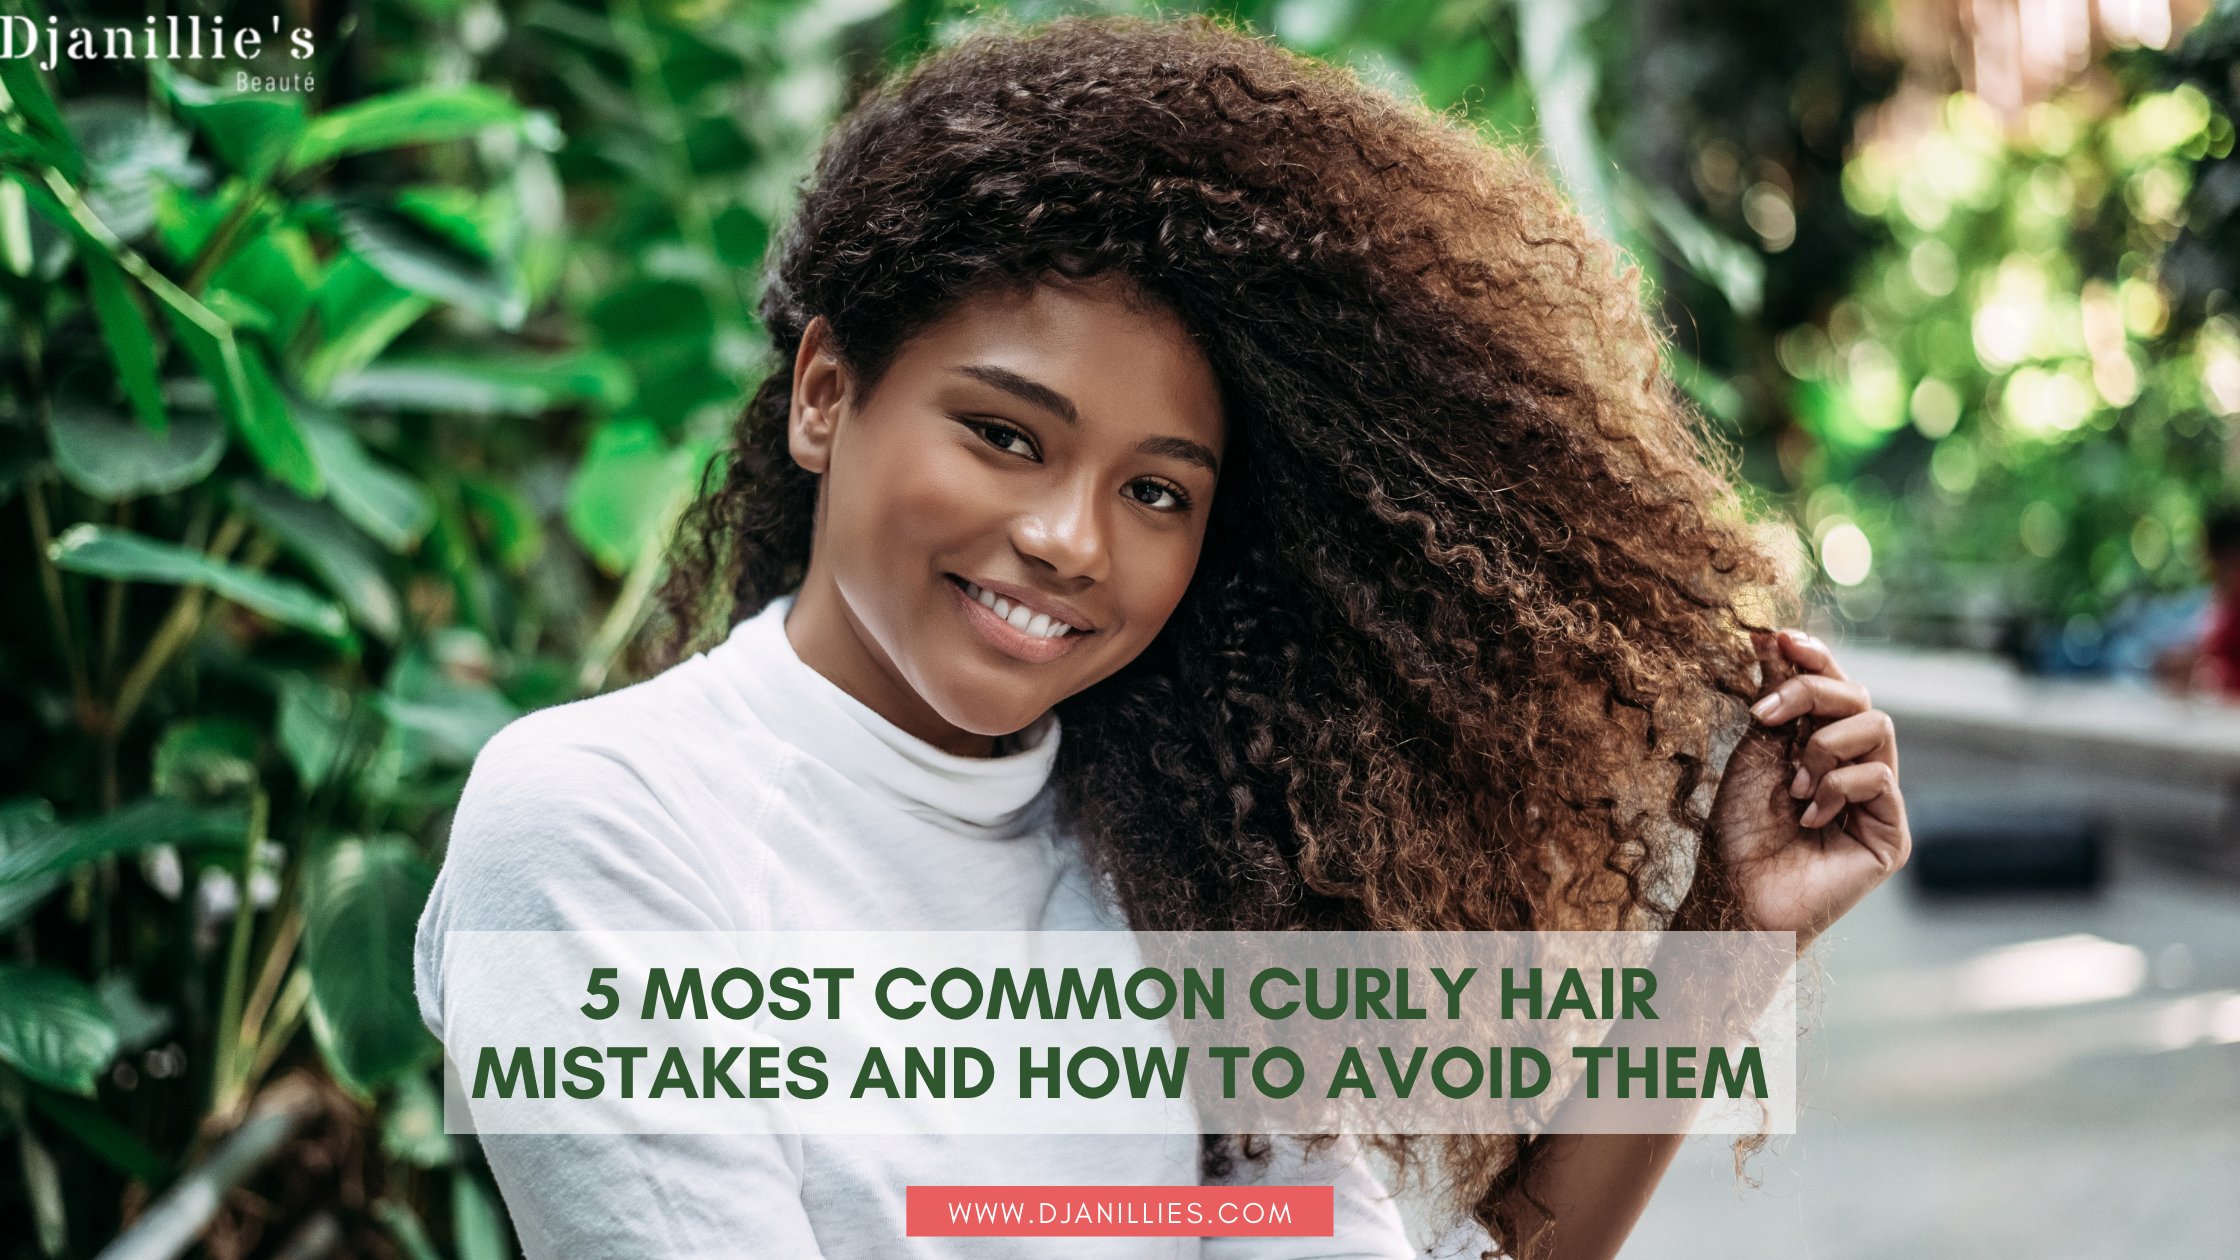 5 MOST COMMON CURLY HAIR MISTAKES AND HOW TO AVOID THEM